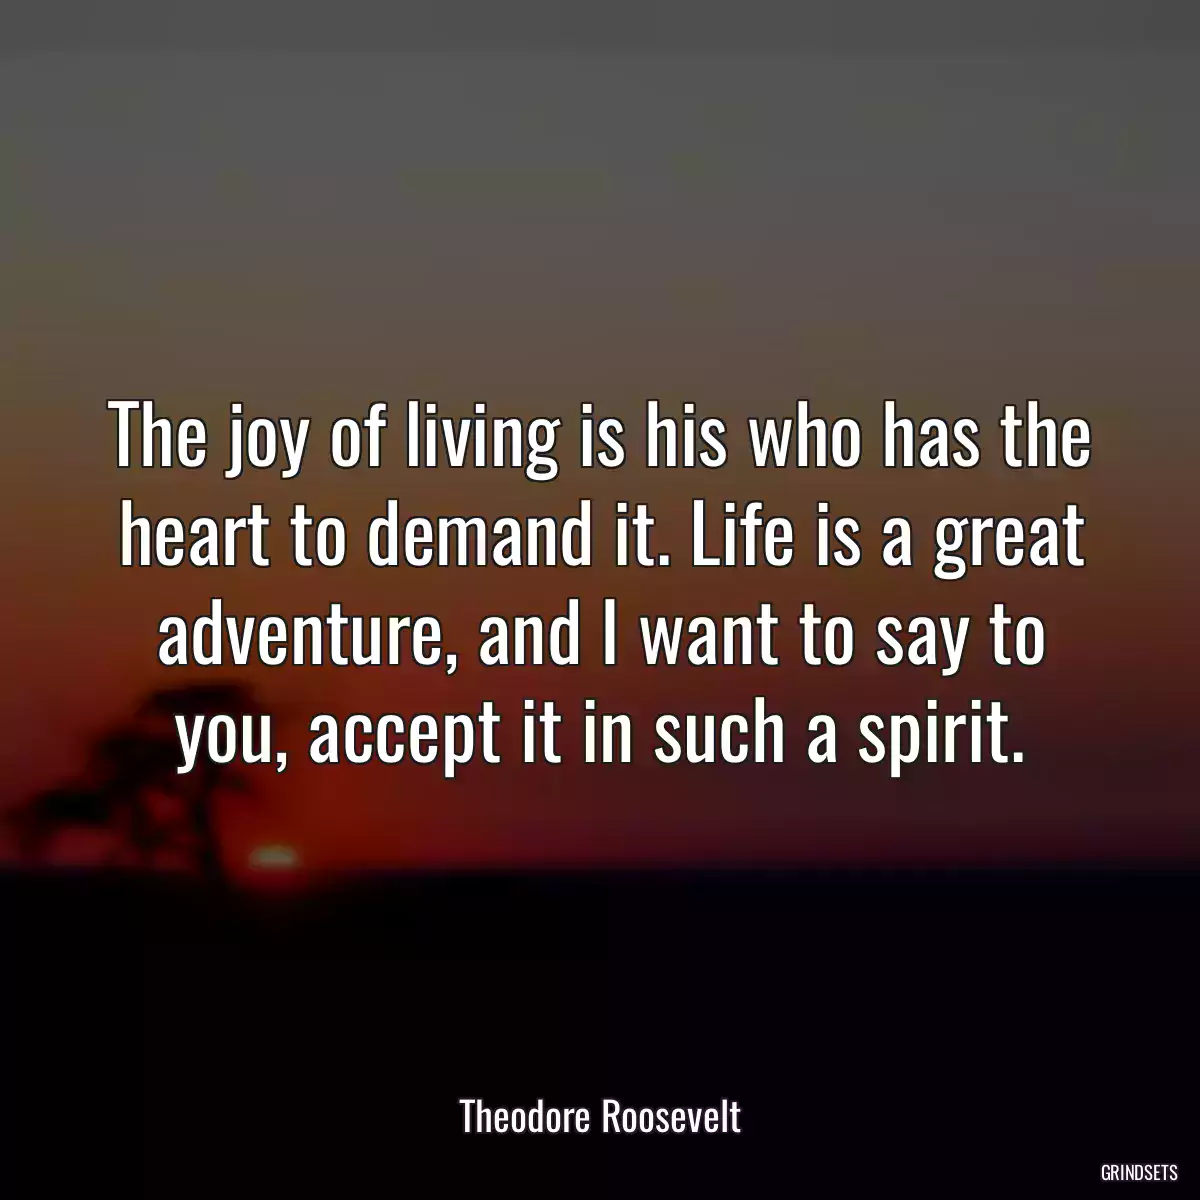 The joy of living is his who has the heart to demand it. Life is a great adventure, and I want to say to you, accept it in such a spirit.